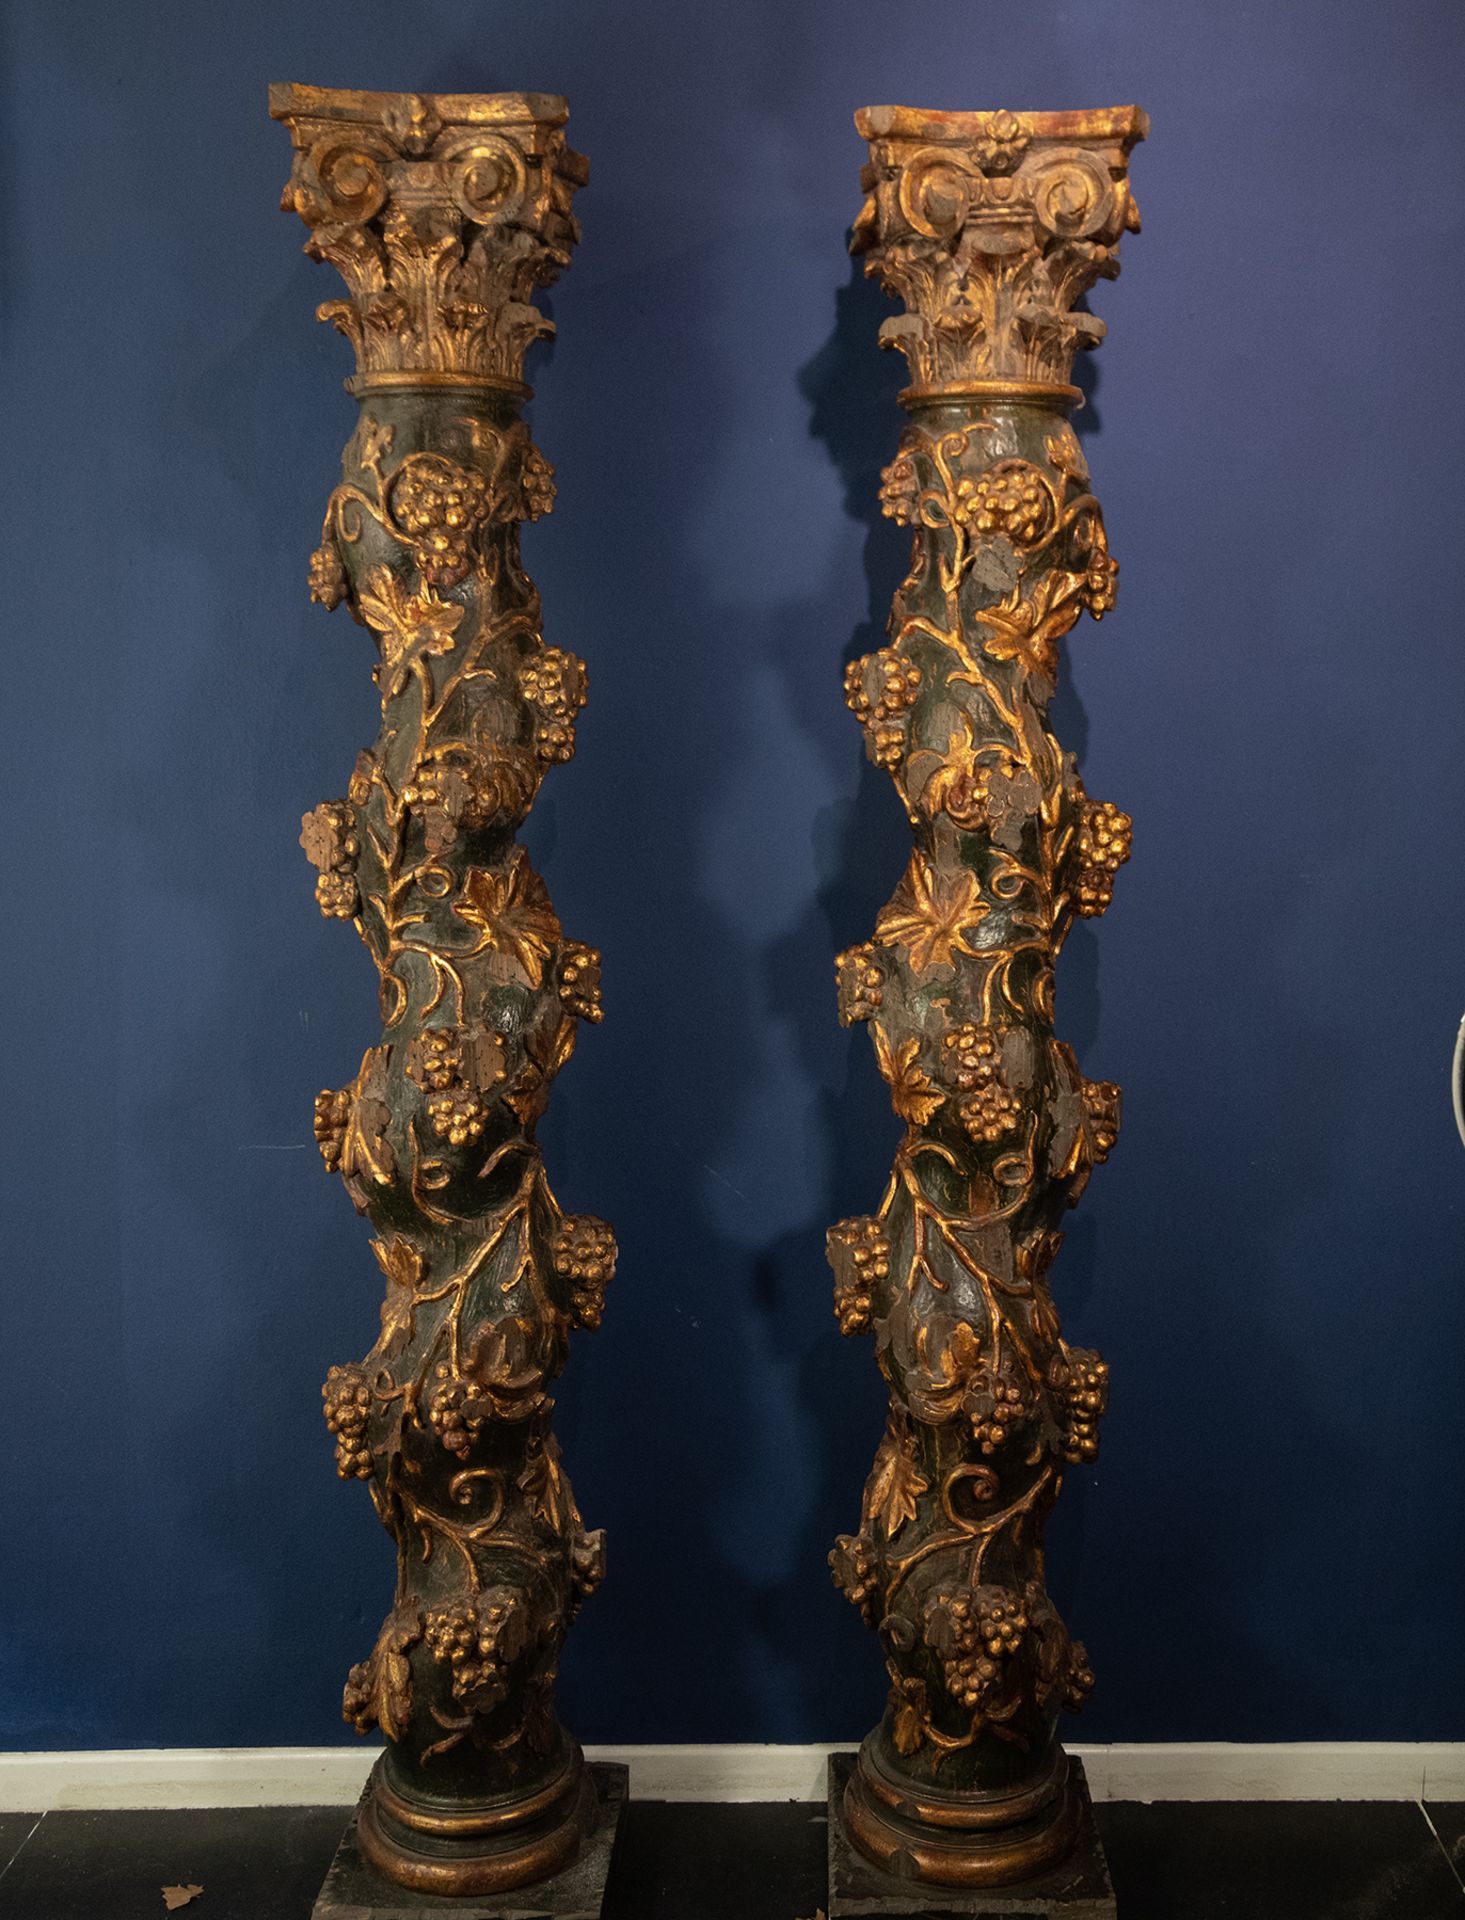 Pair of Large Solomonic Columns, 17th century, in carved, polychromed and gilt wood